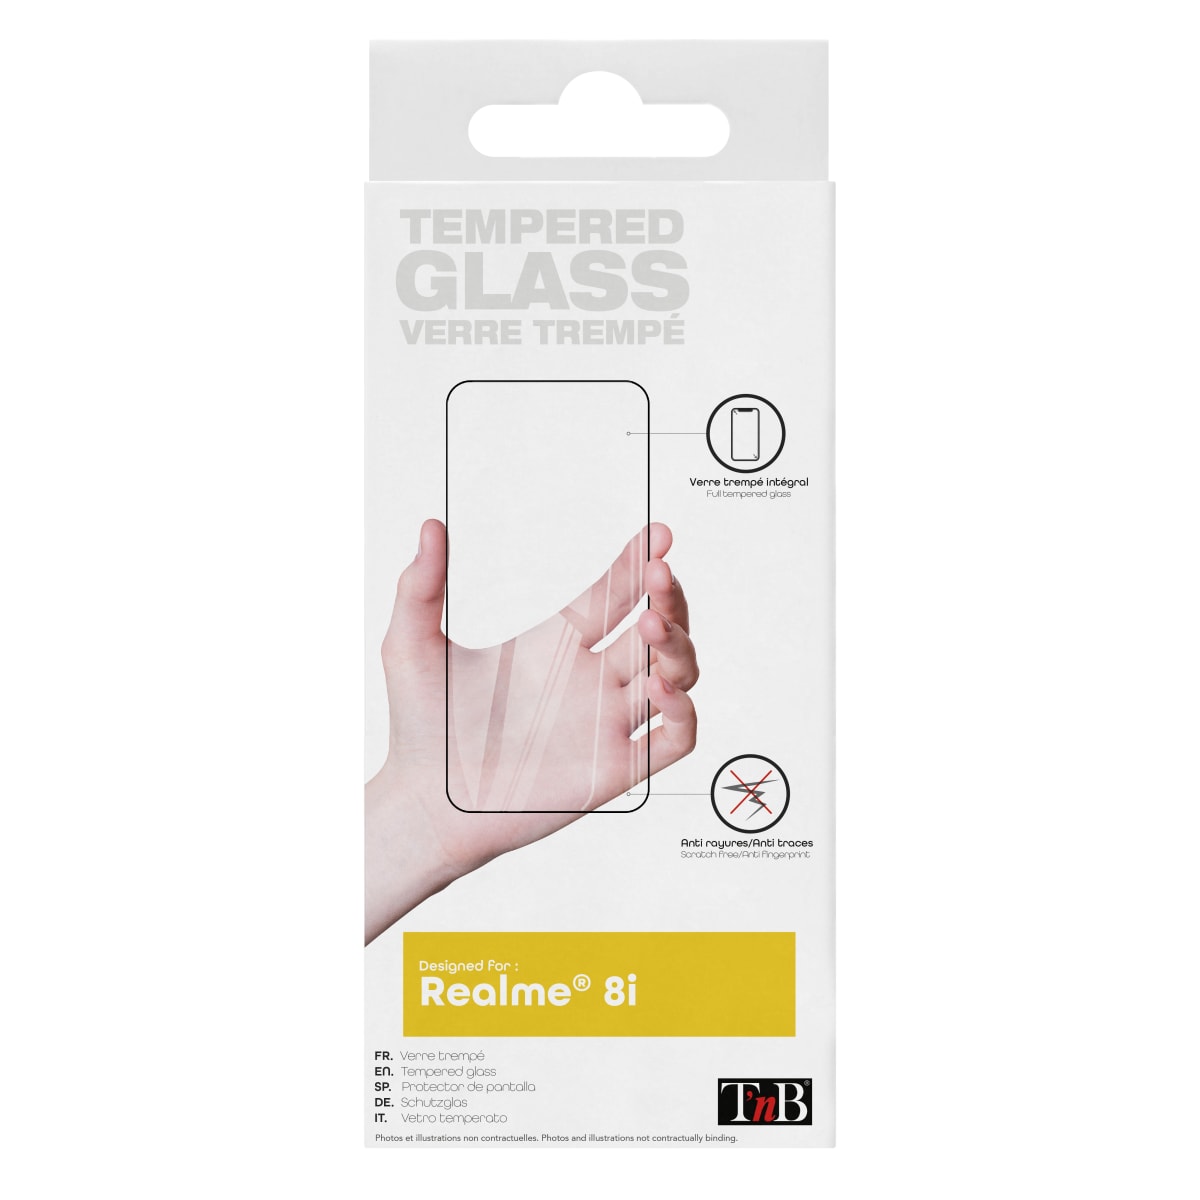 Tempered glass protection for Realme 8i